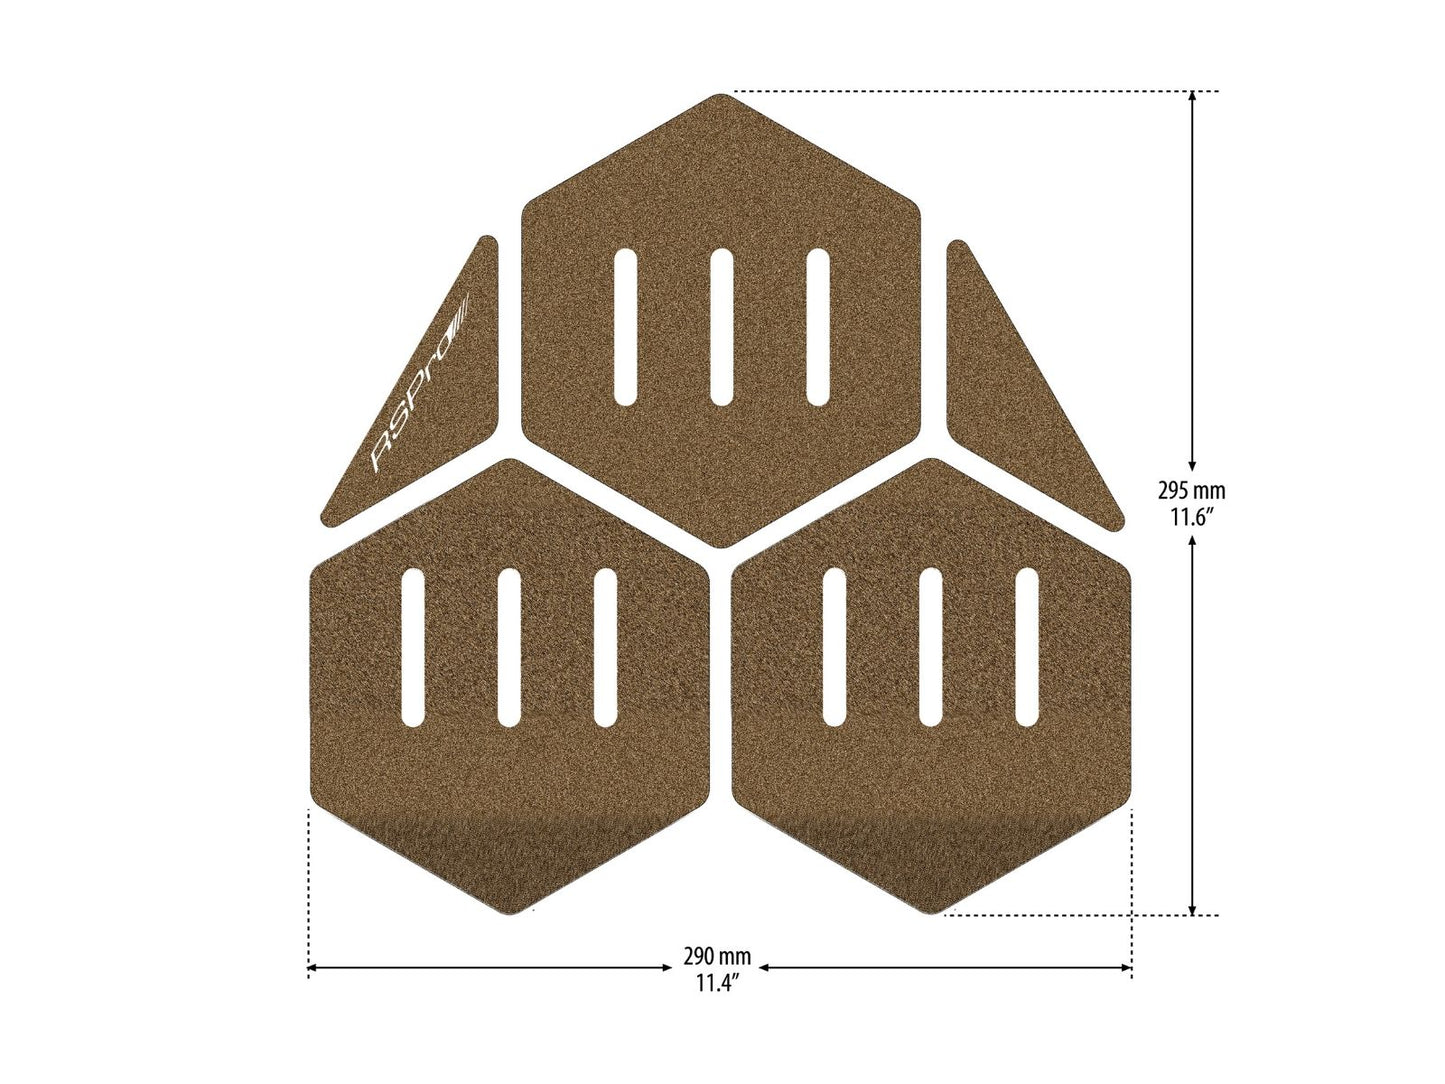 RSPro wid cork tail pad for surfboards - product dimensions.